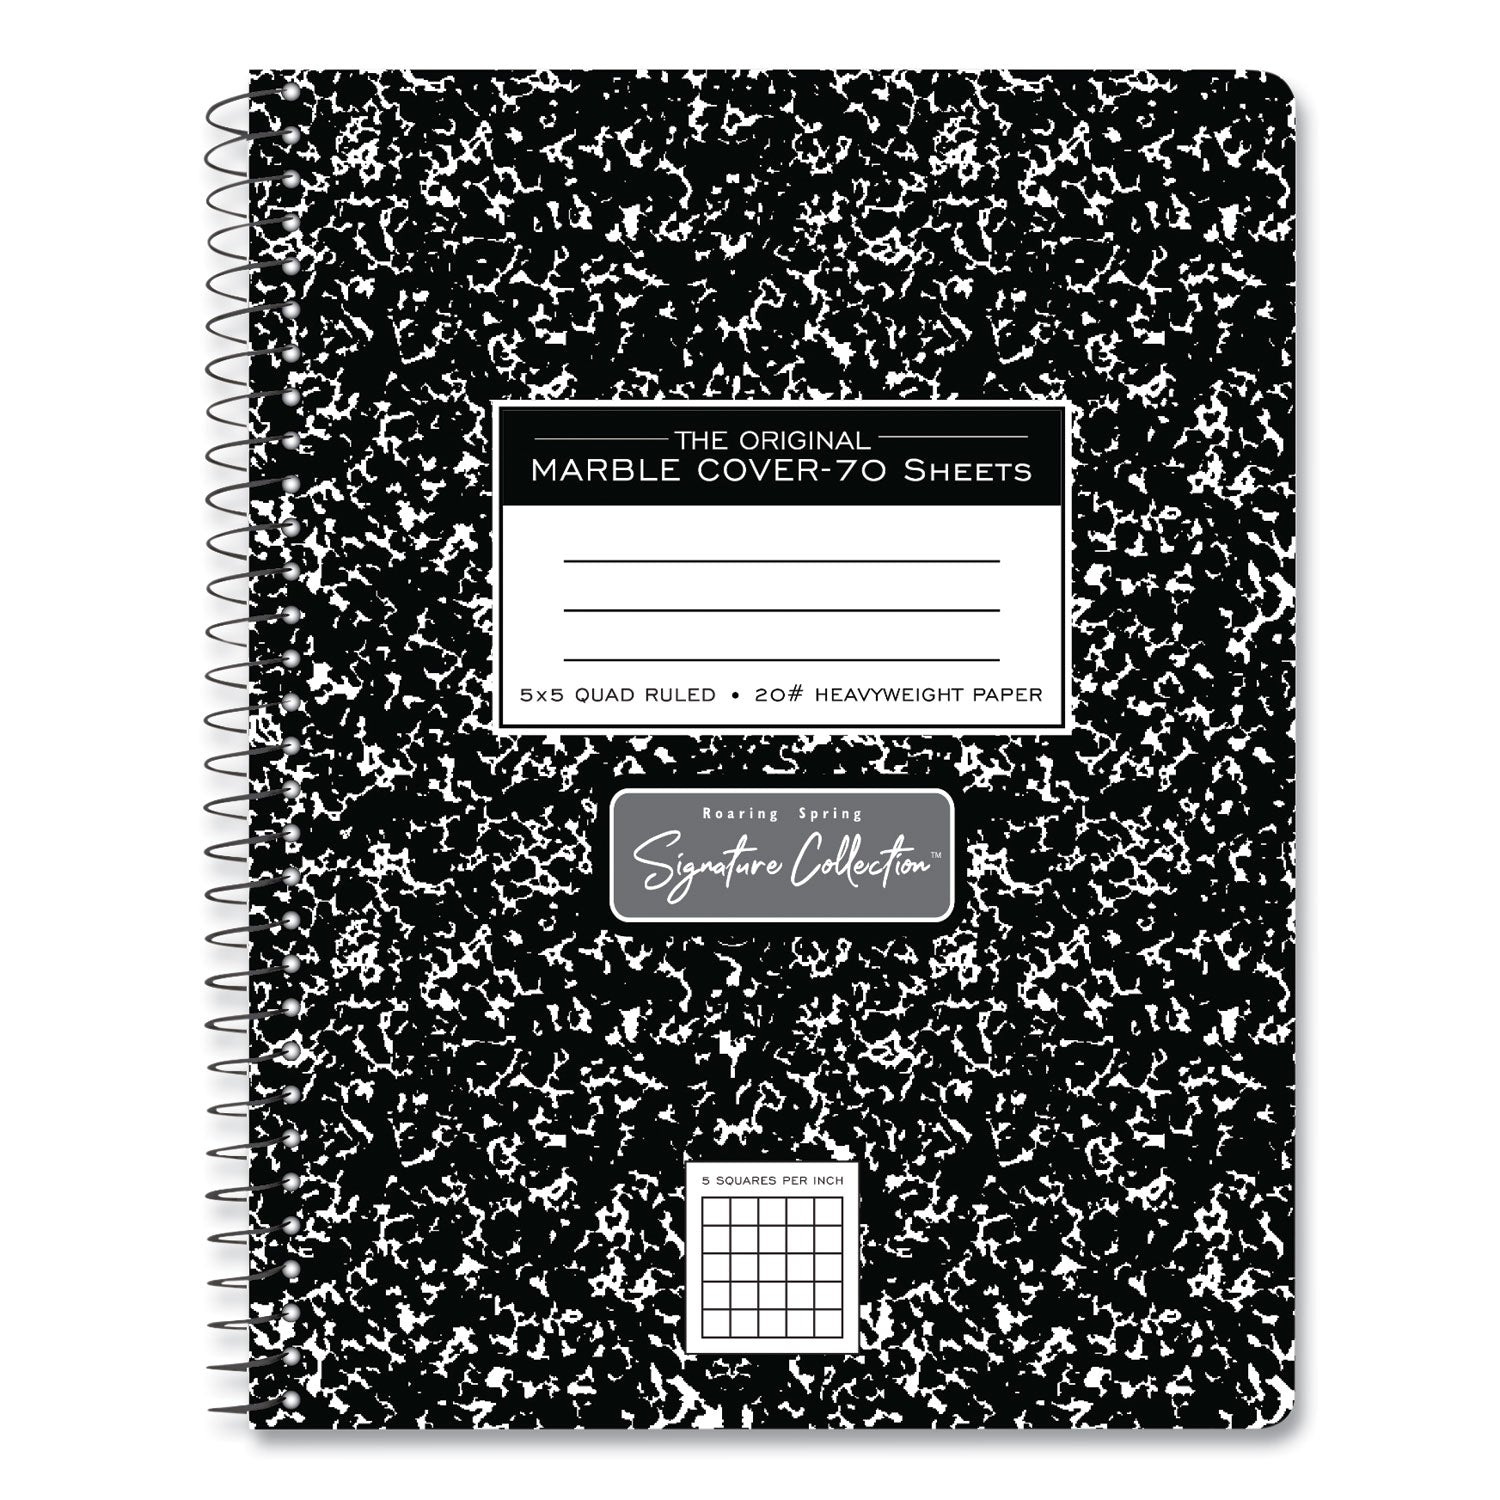 spring-signature-composition-book-quad-5-sq-in-rule-black-marble-cover-70-975-x-75-sheet-24-ct-ships-in-4-6-bus-days_roa10113cs - 1